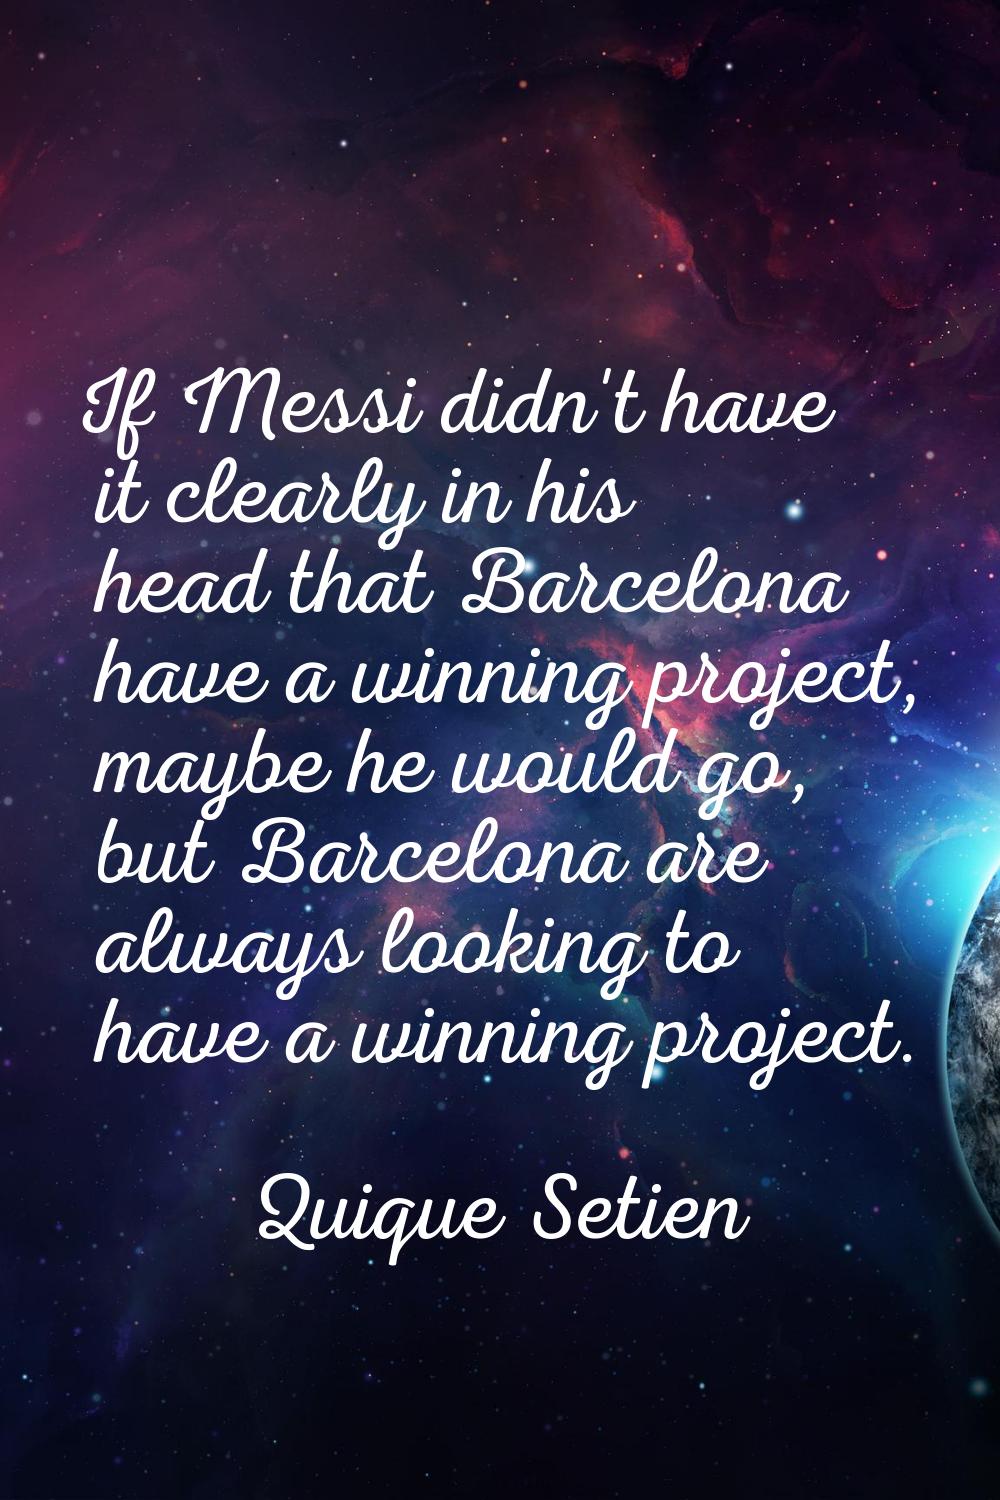 If Messi didn't have it clearly in his head that Barcelona have a winning project, maybe he would g